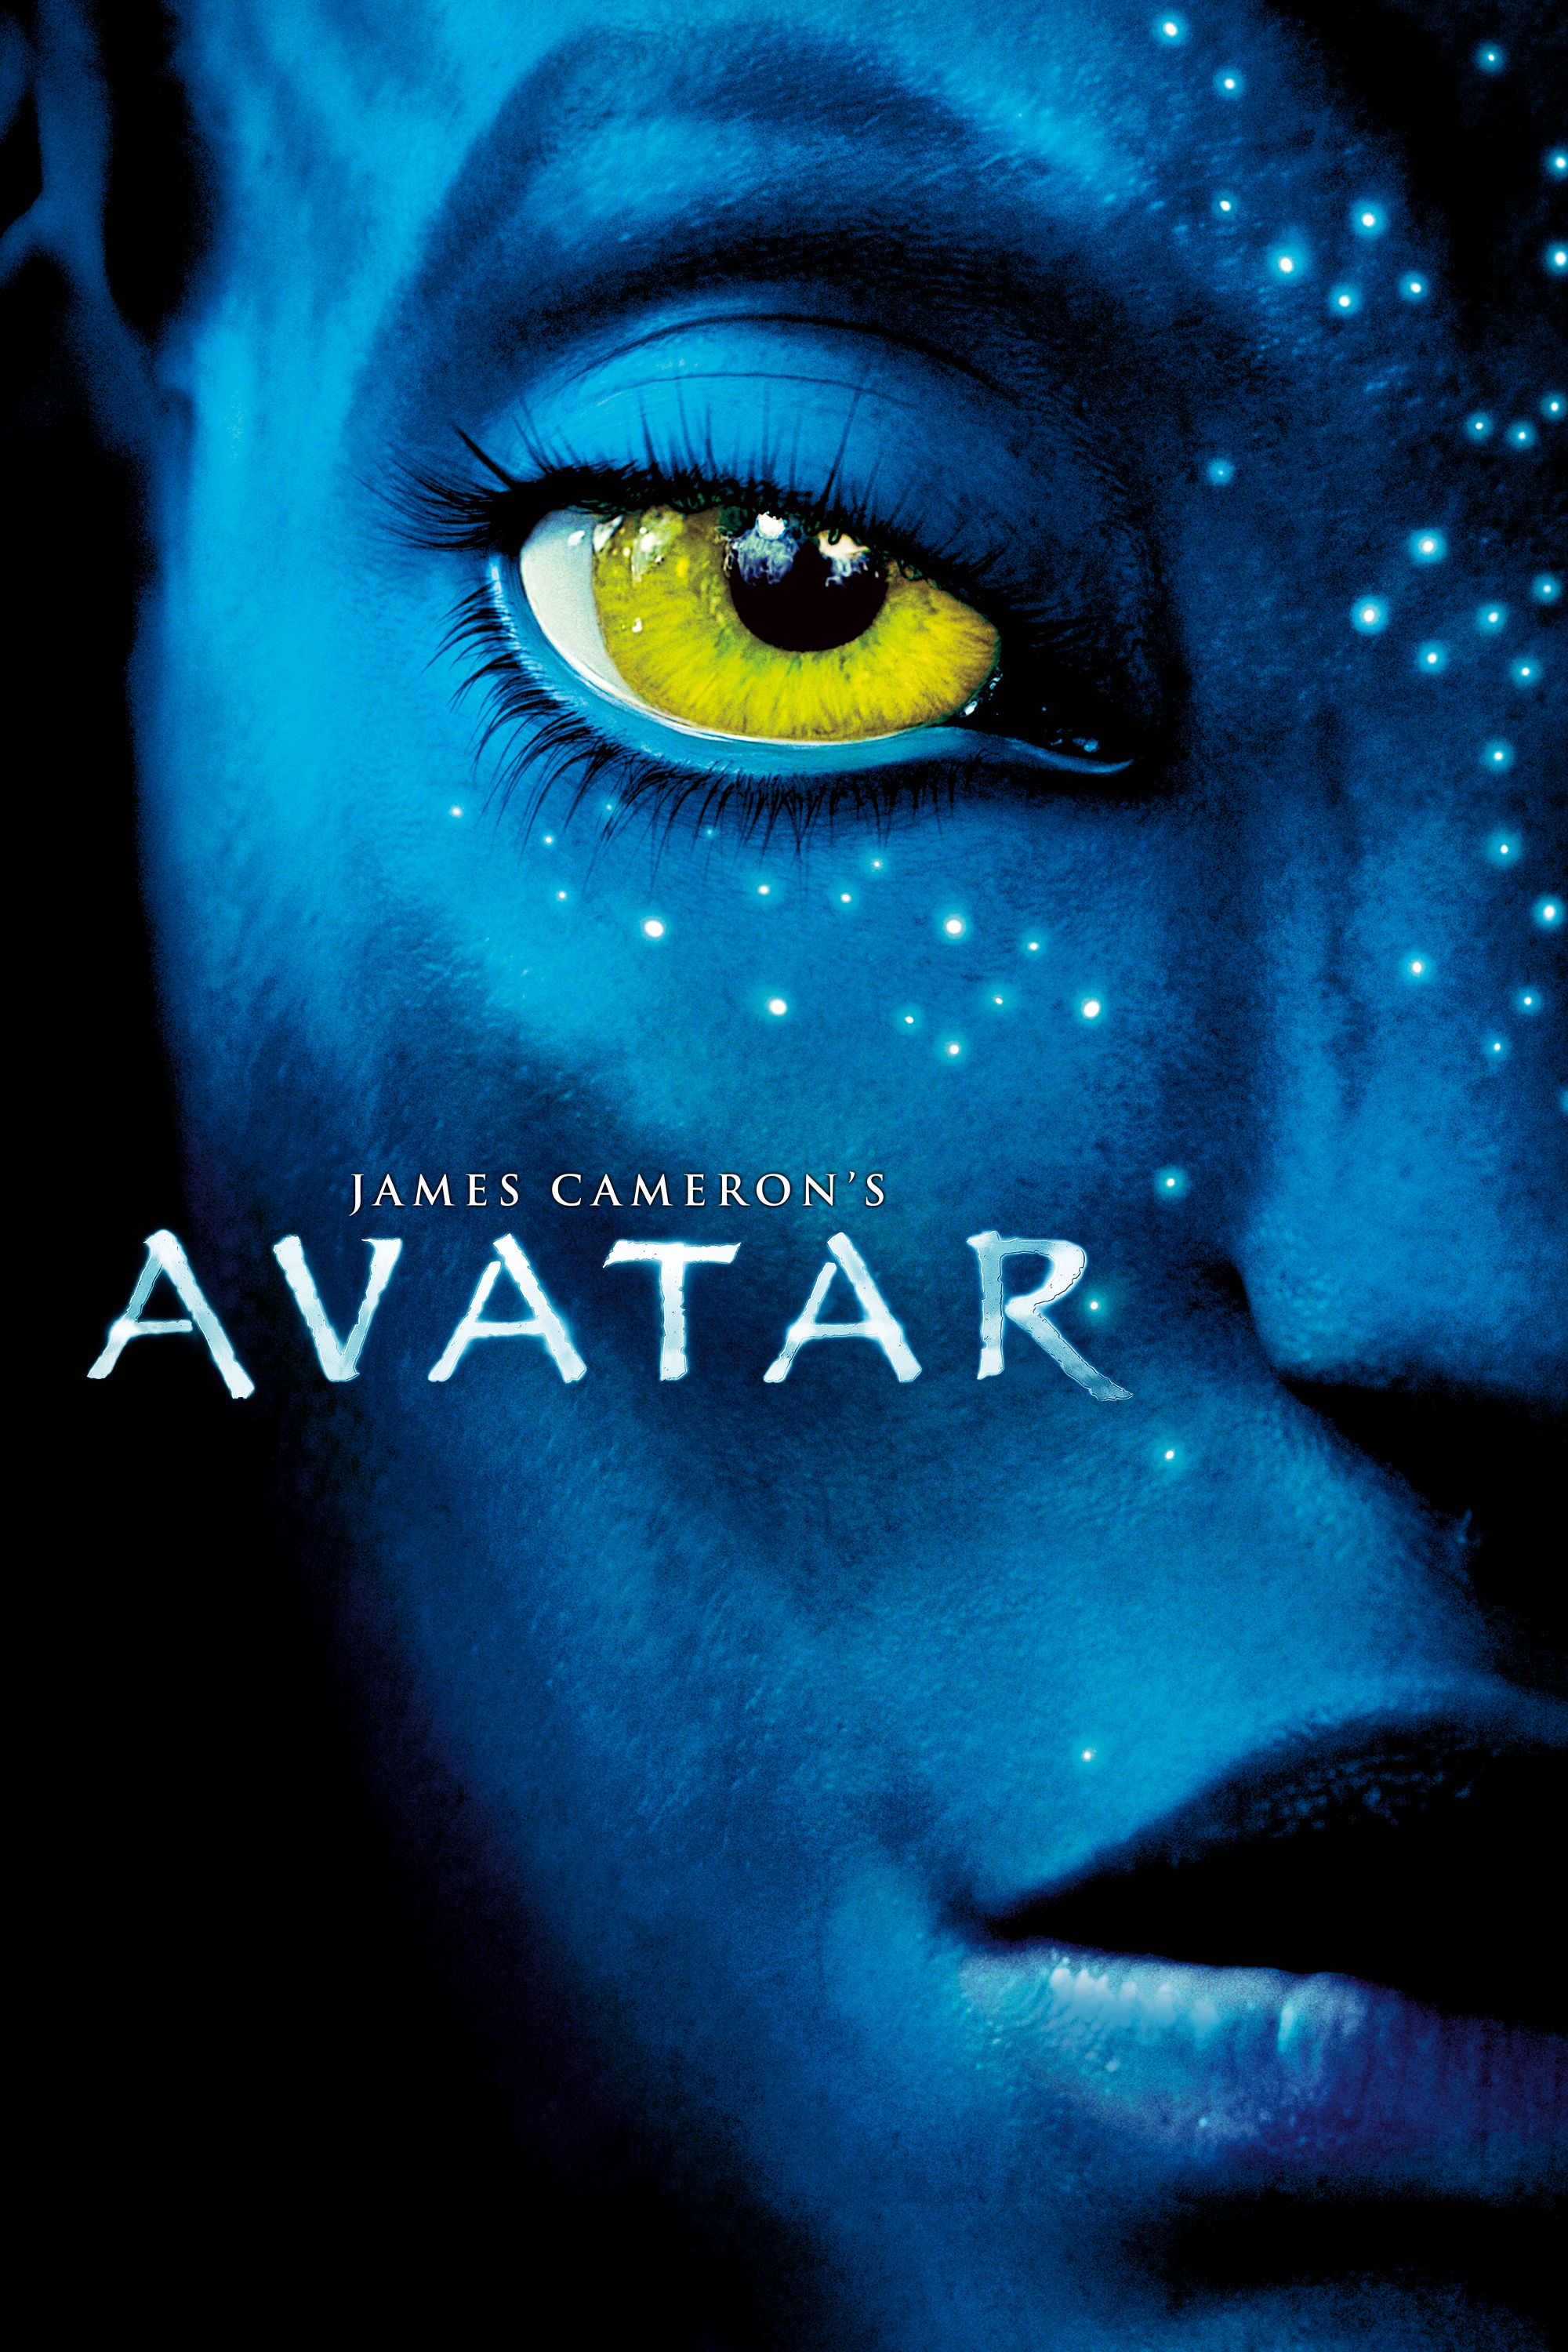 Watch Avatar Full movie Online In HD  Find where to watch it online on  Justdial